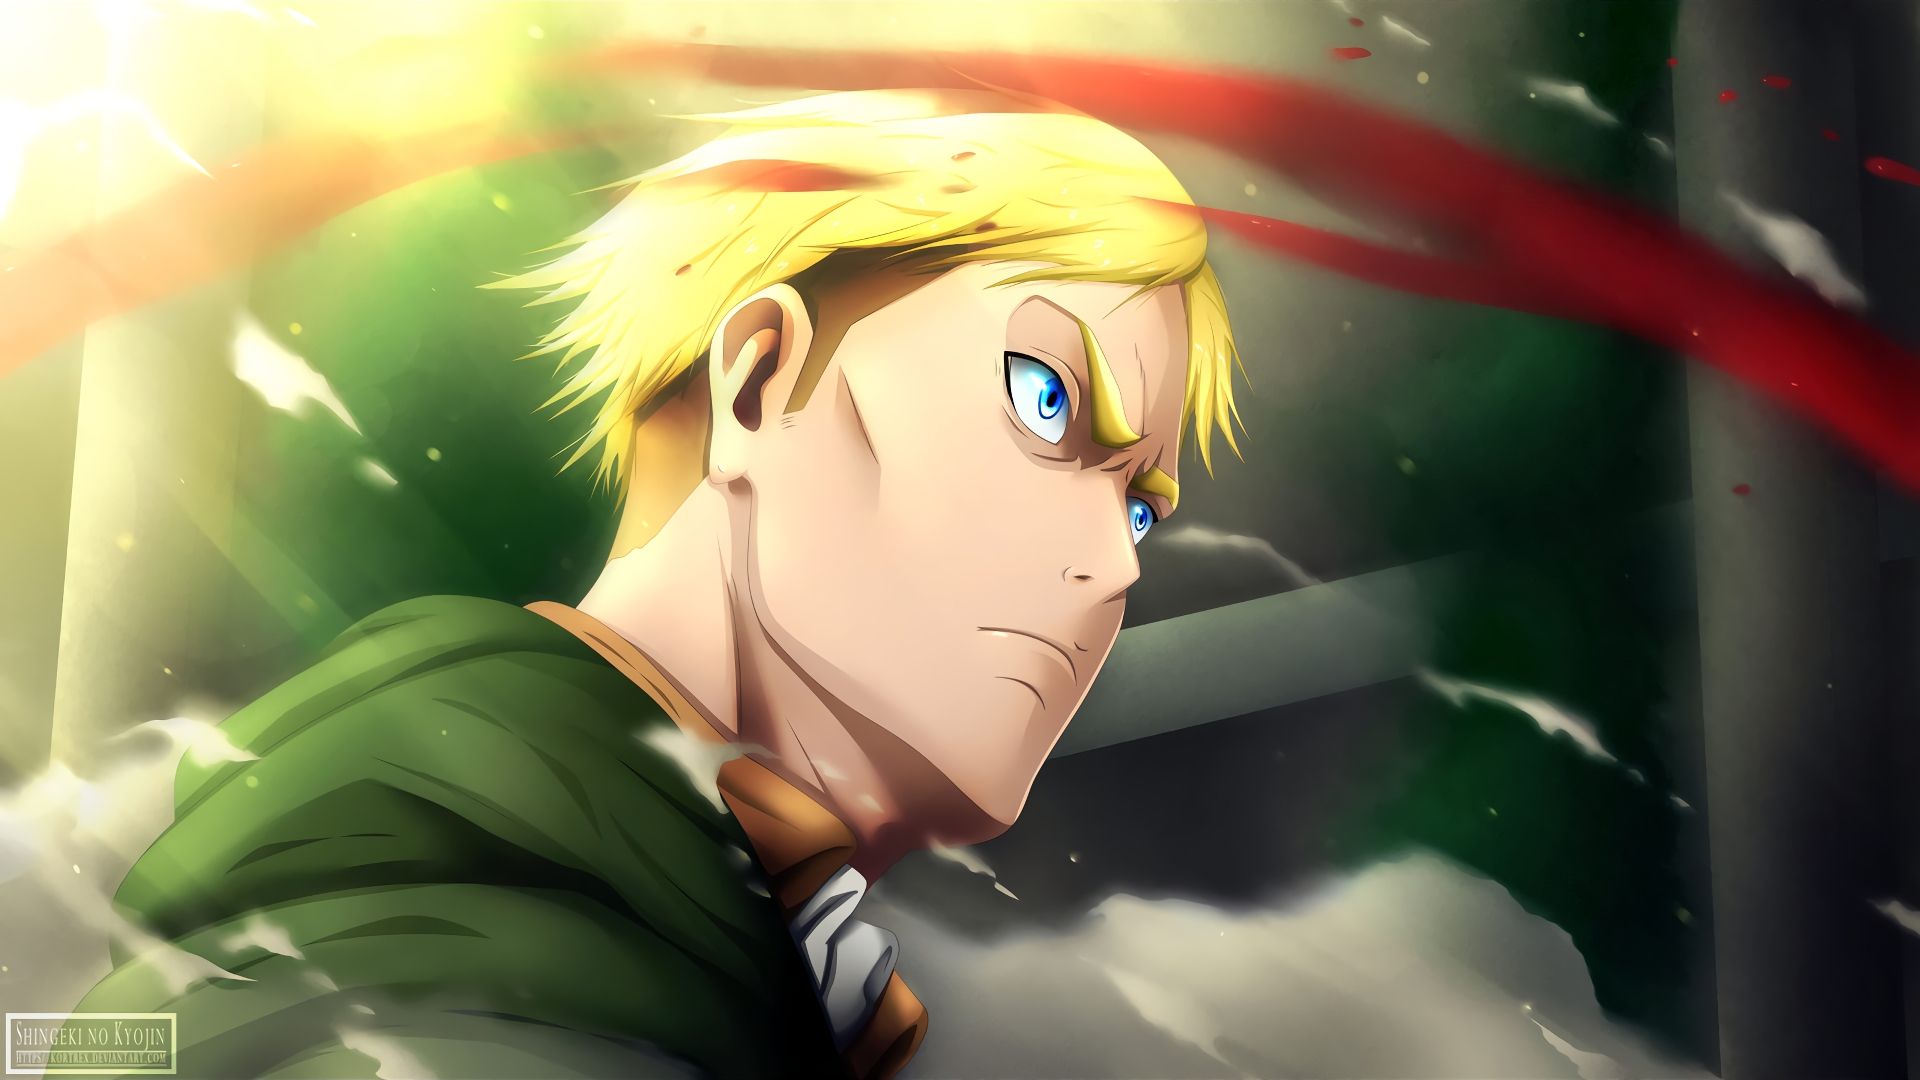 Download wallpaper from anime Attack On Titan with tags: PC, Erwin Smith